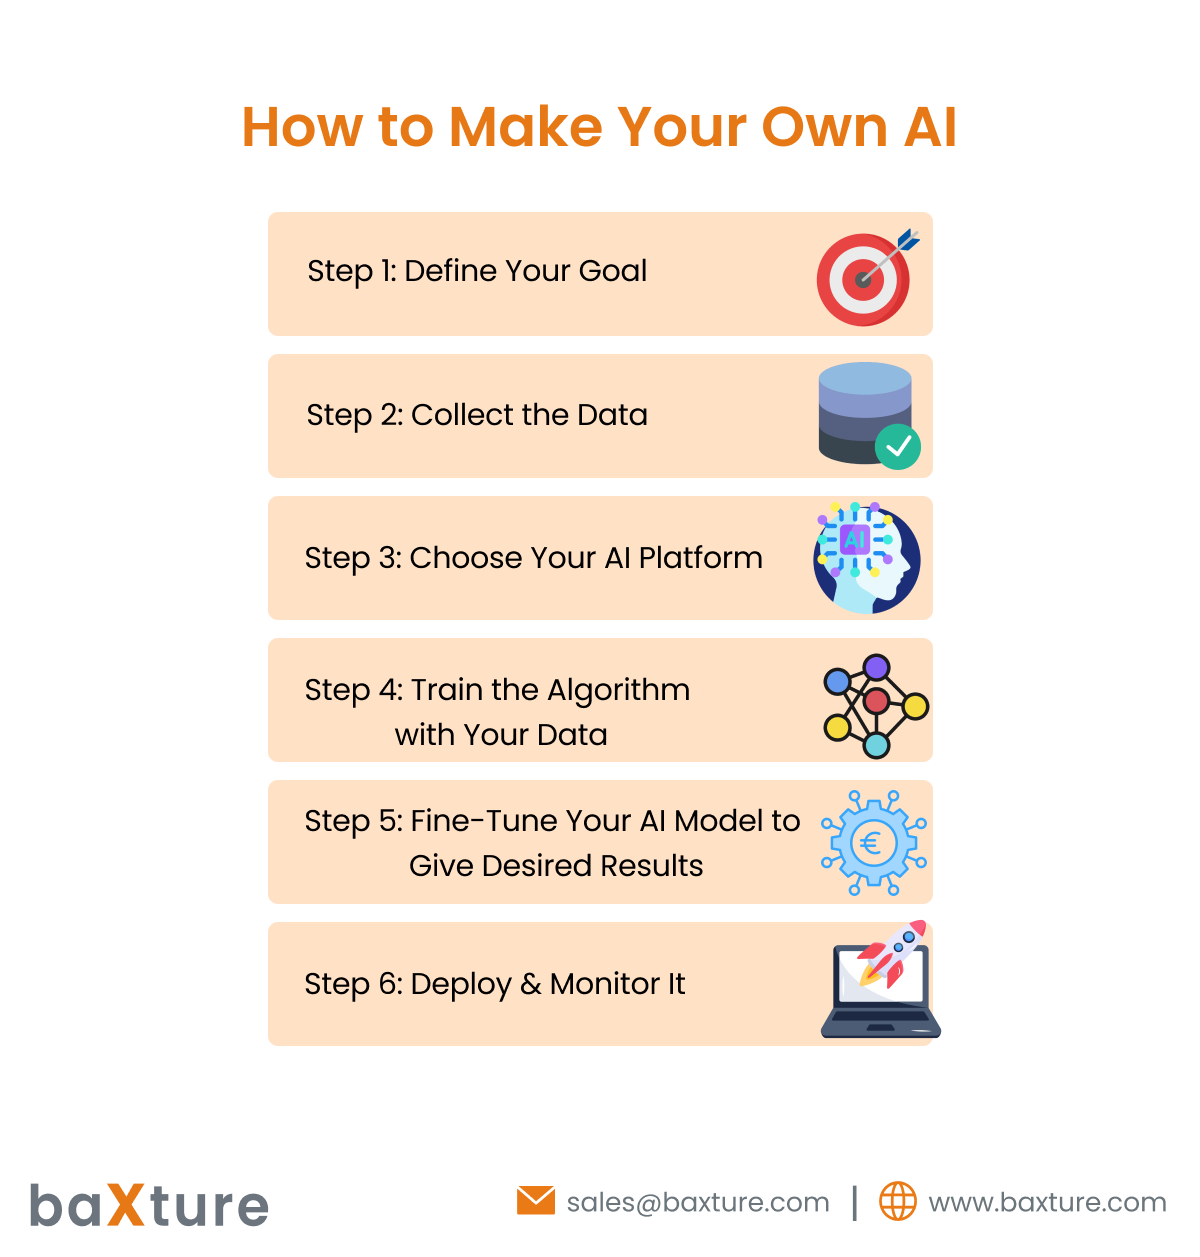 How to Make Your Own AI